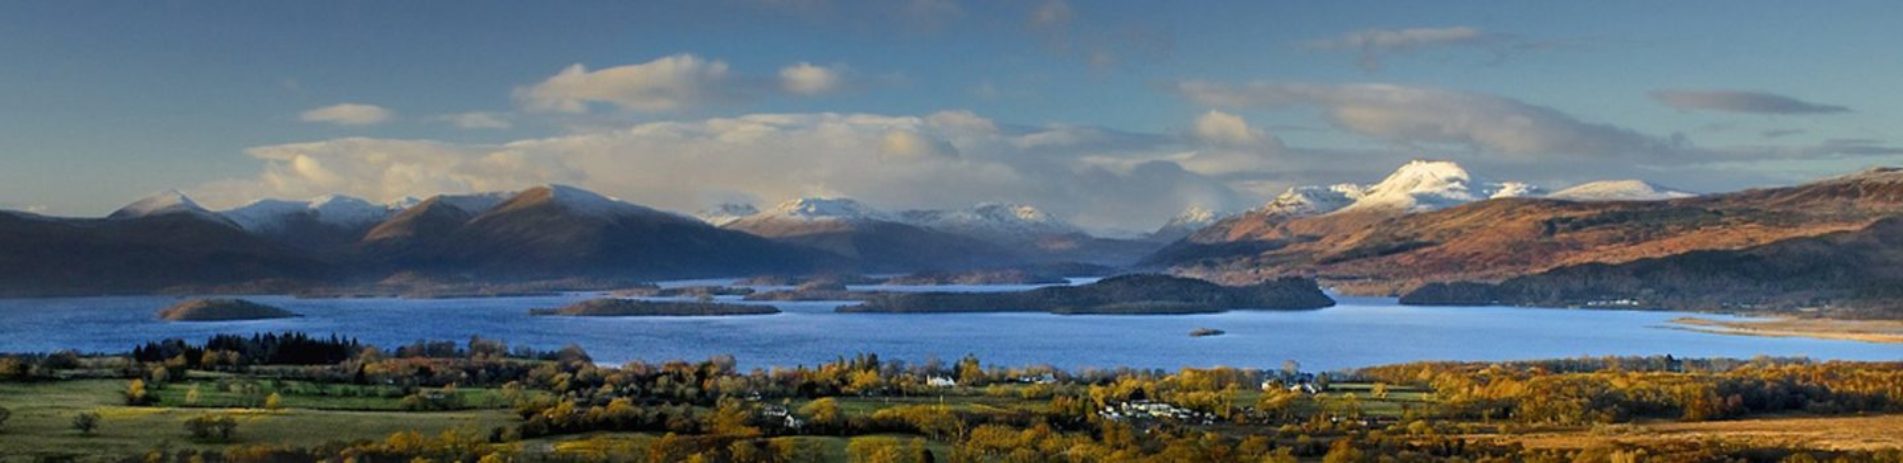 panorama-of-loch-lomond-islands-and-surrounding-hills-from-duncryne-hill-in-the-south